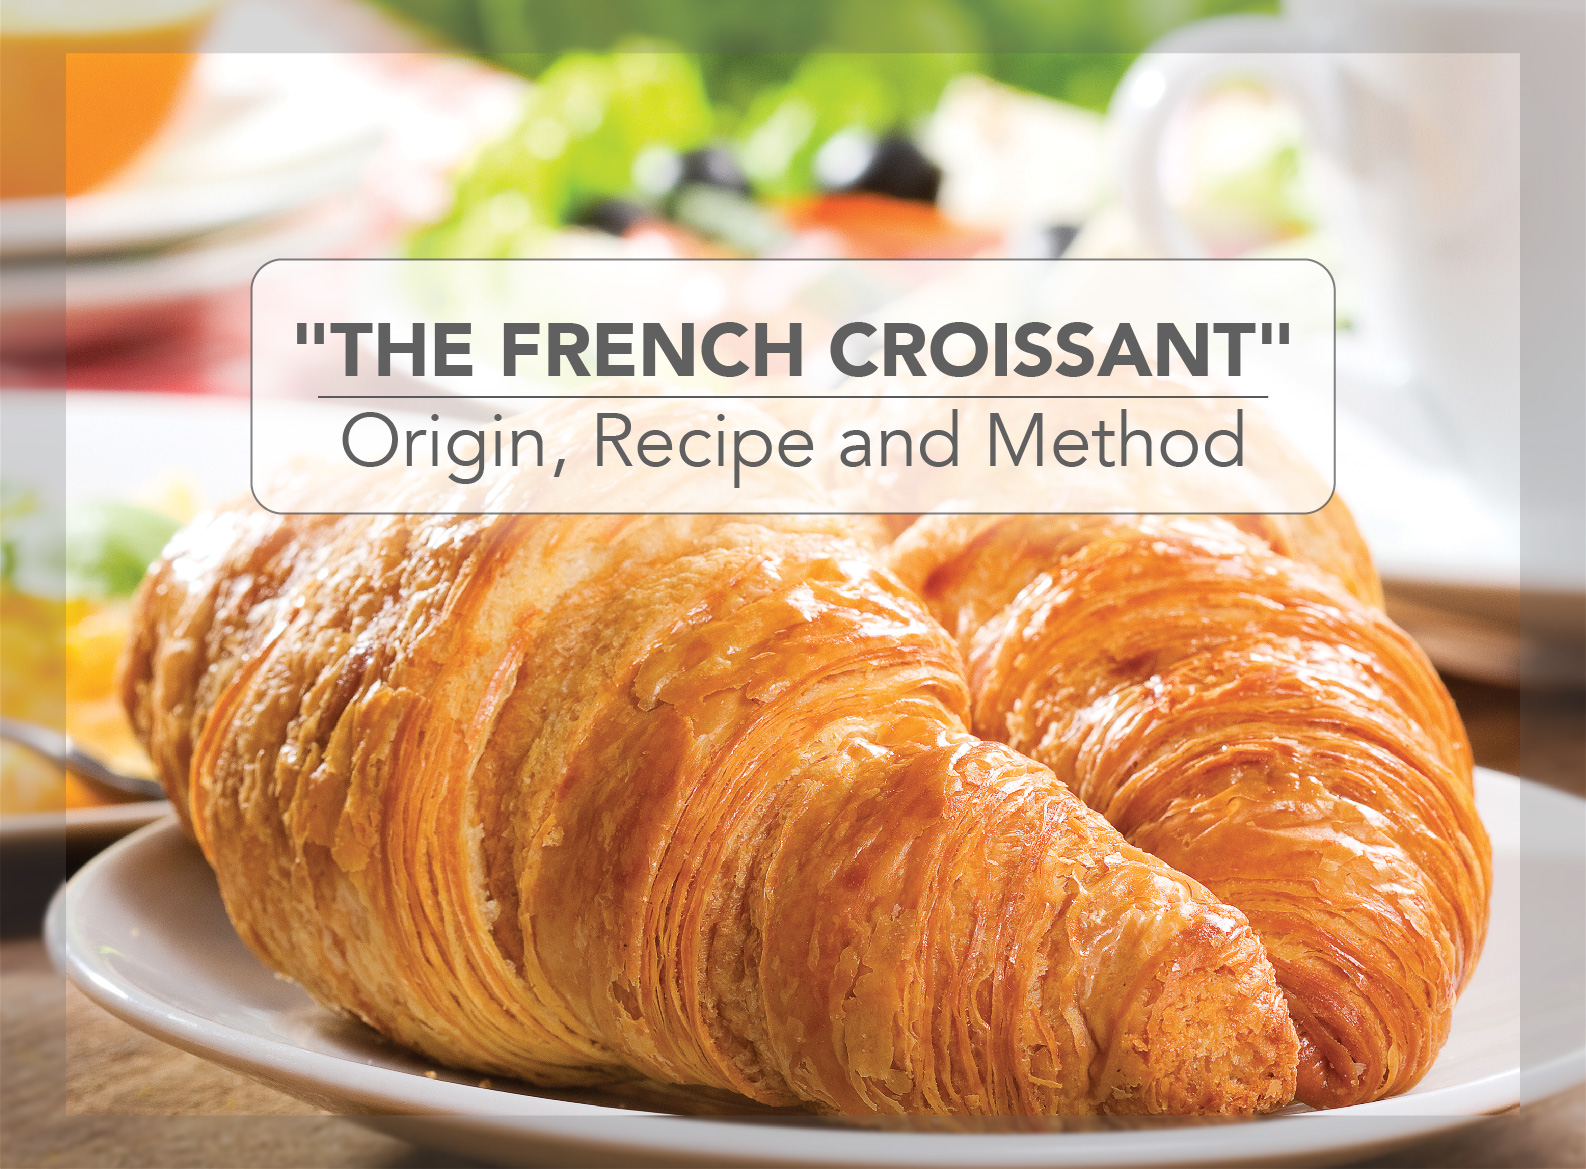 "The French Croissant" - Origin, Recipe and Method